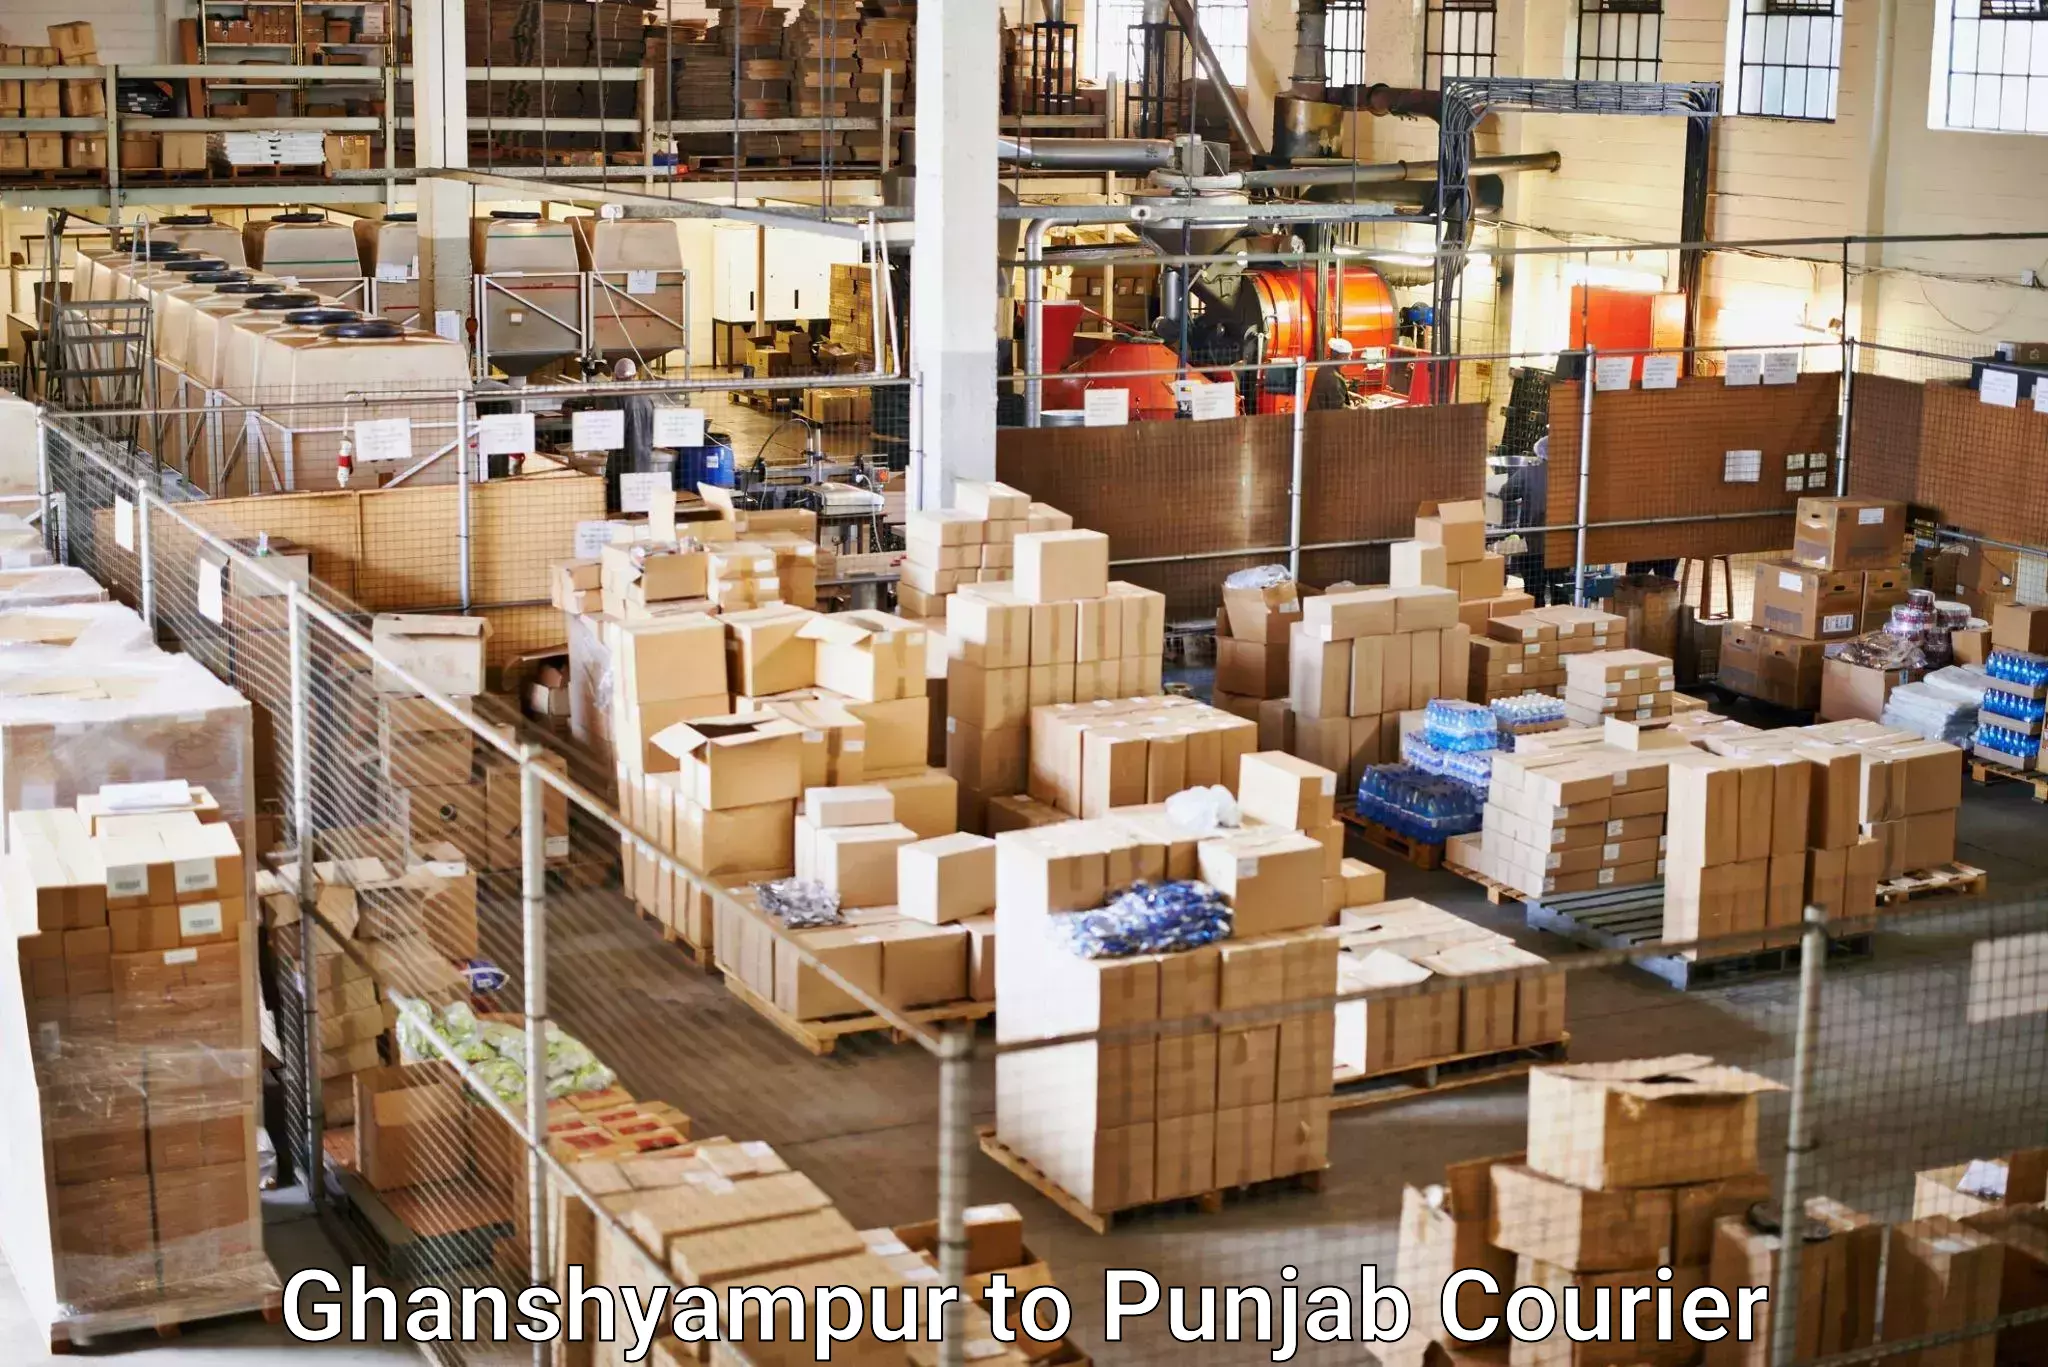 Full-service courier options in Ghanshyampur to Bathinda